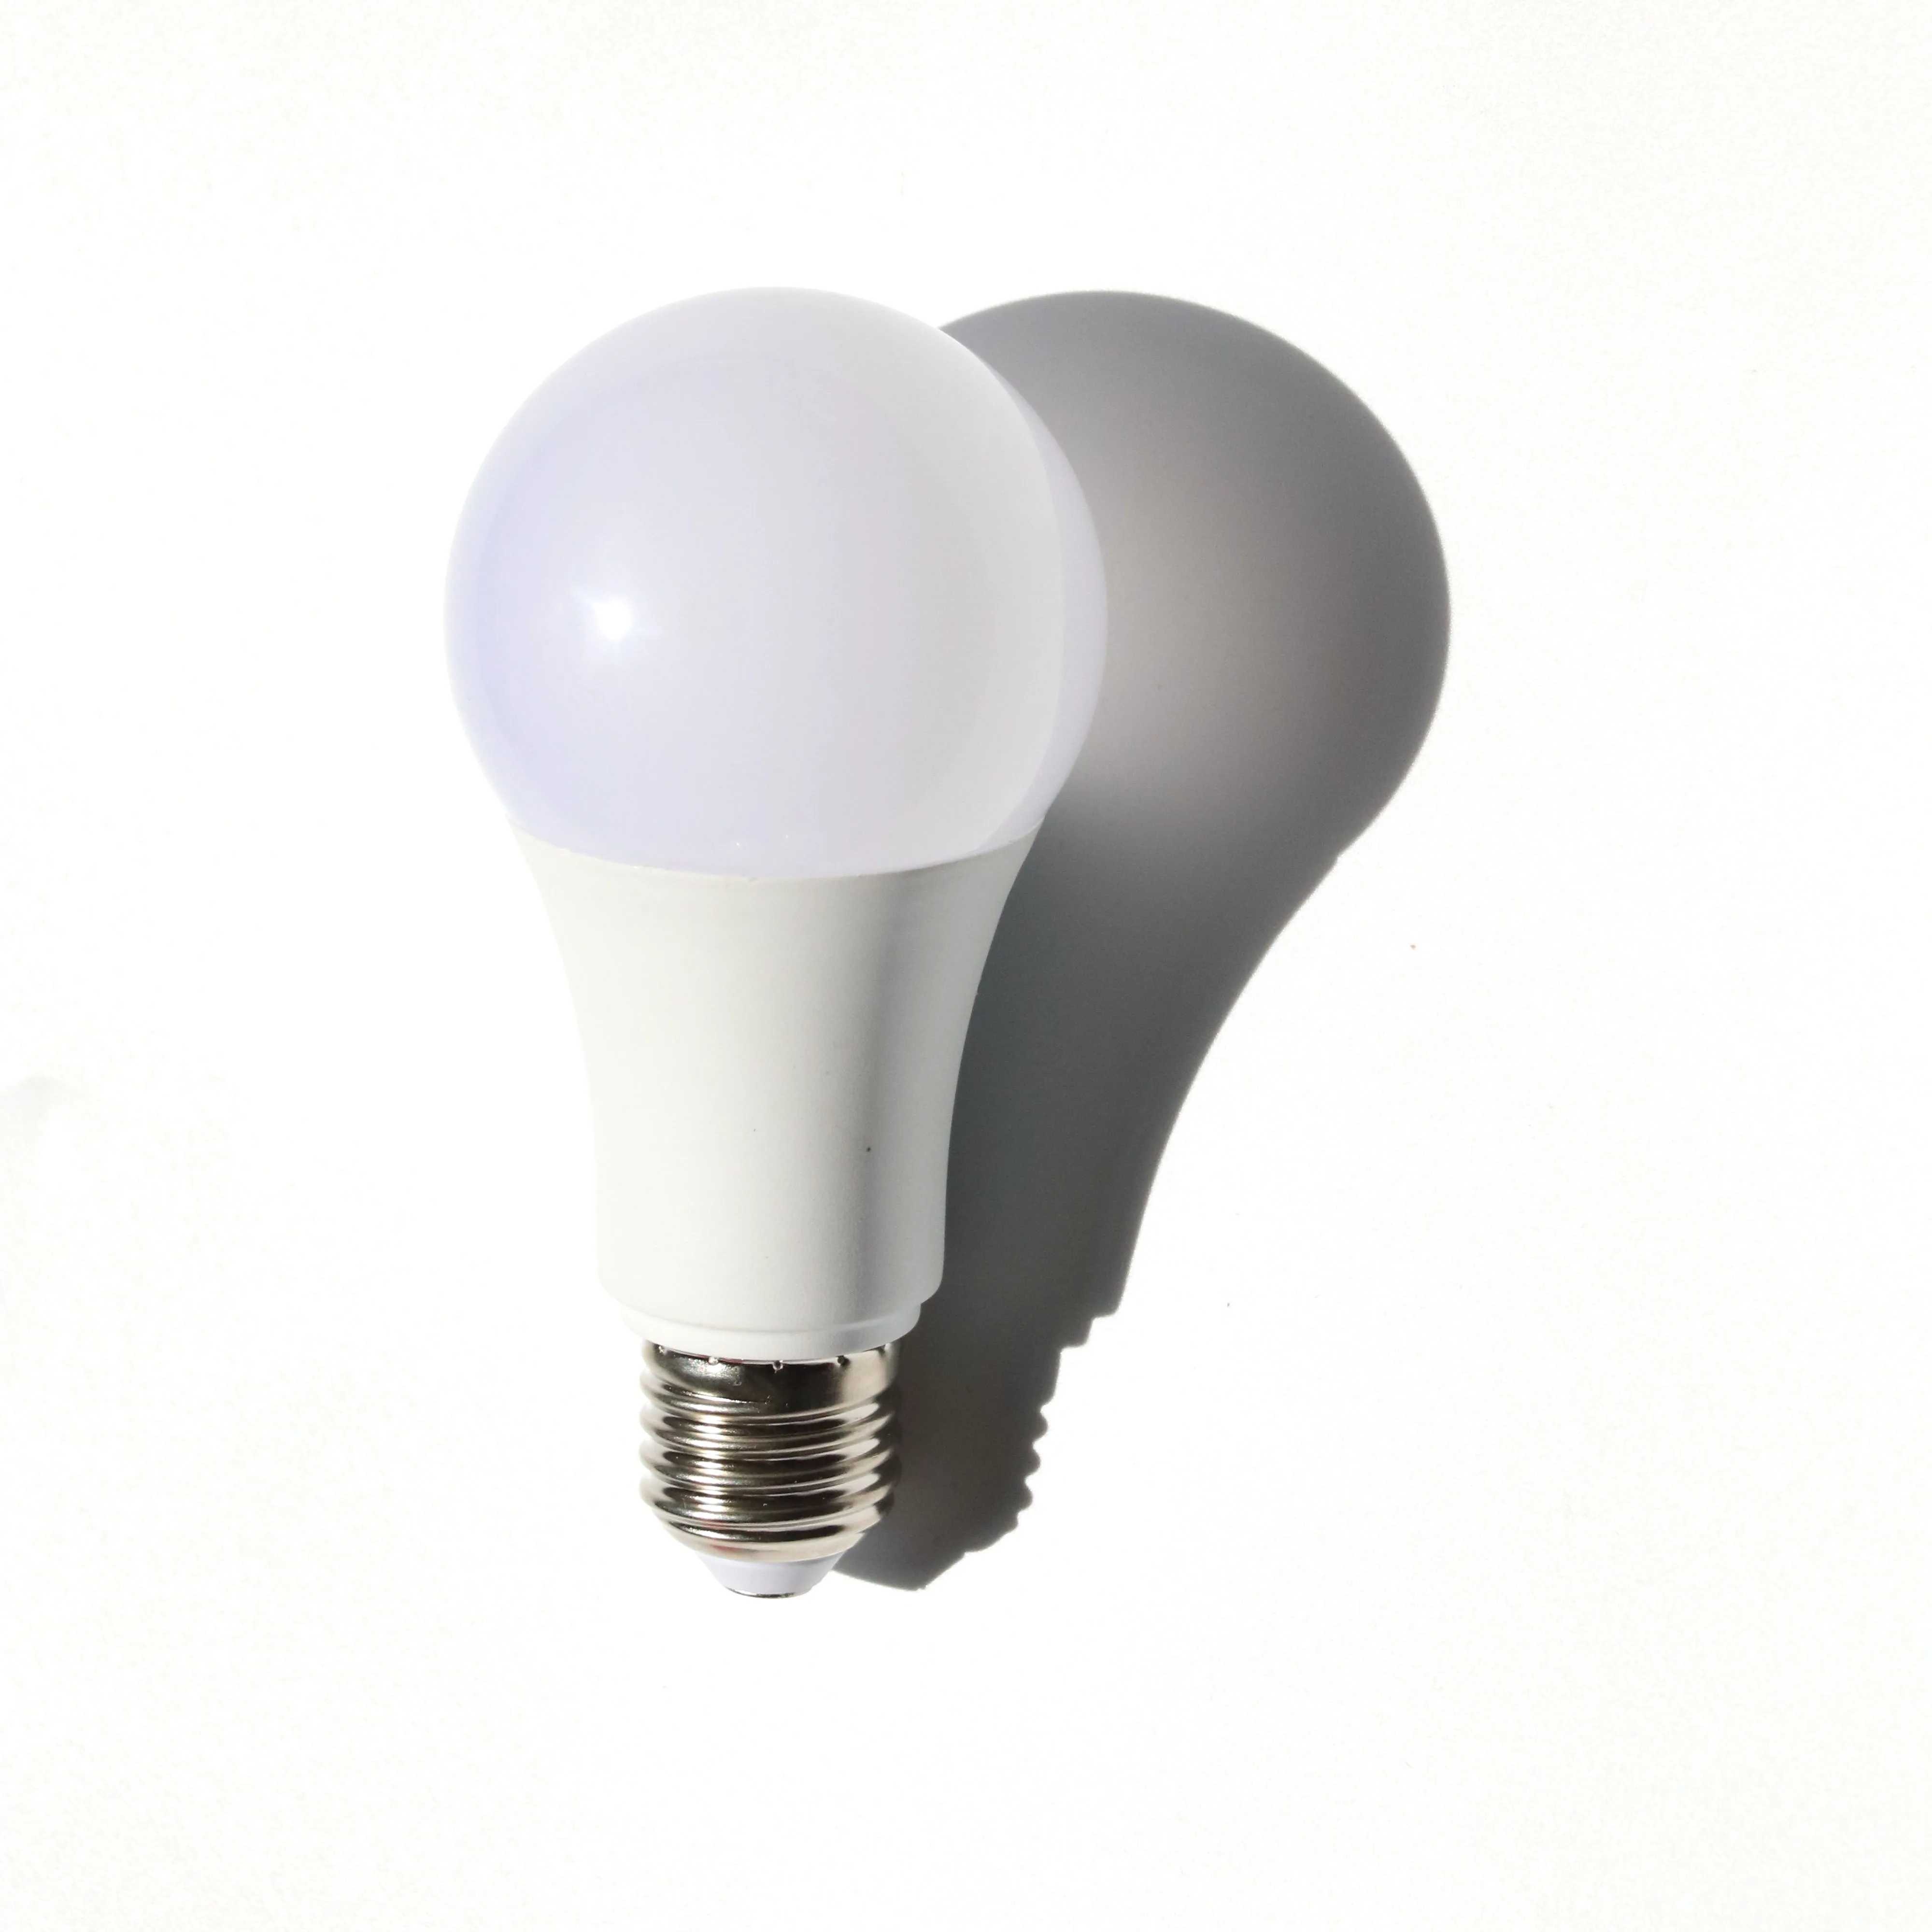 Non-Dimmable A19 E26 LED Lamp 100W Equivalent LED Light Bulbs, 14W 1600 Lumens 5000K Daylight White